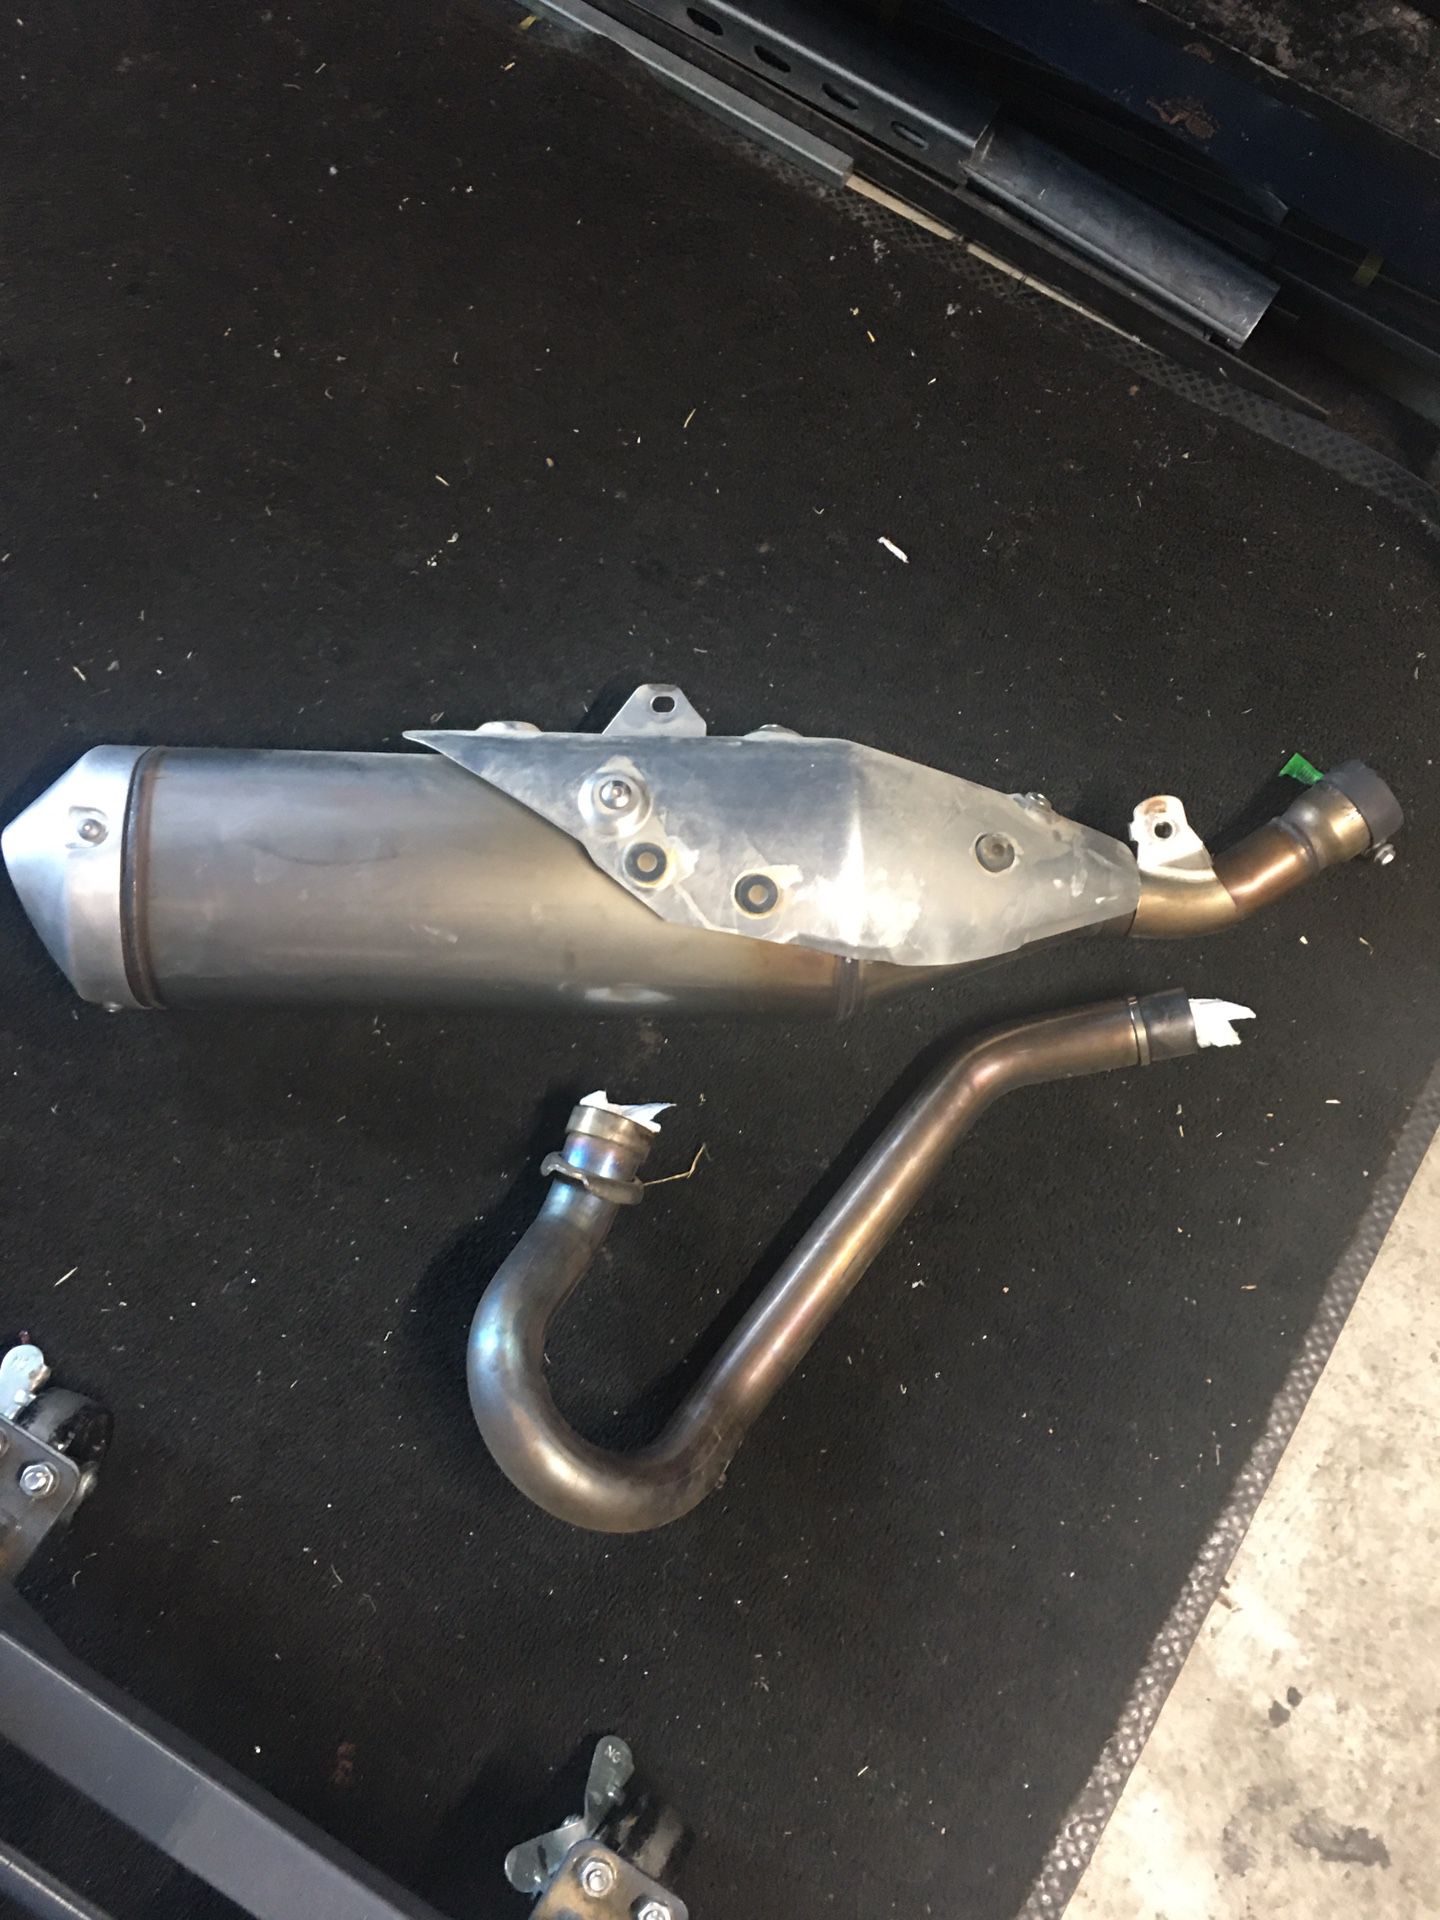 2019 Crf450 full exhaust Stock (used for about 10 hours)